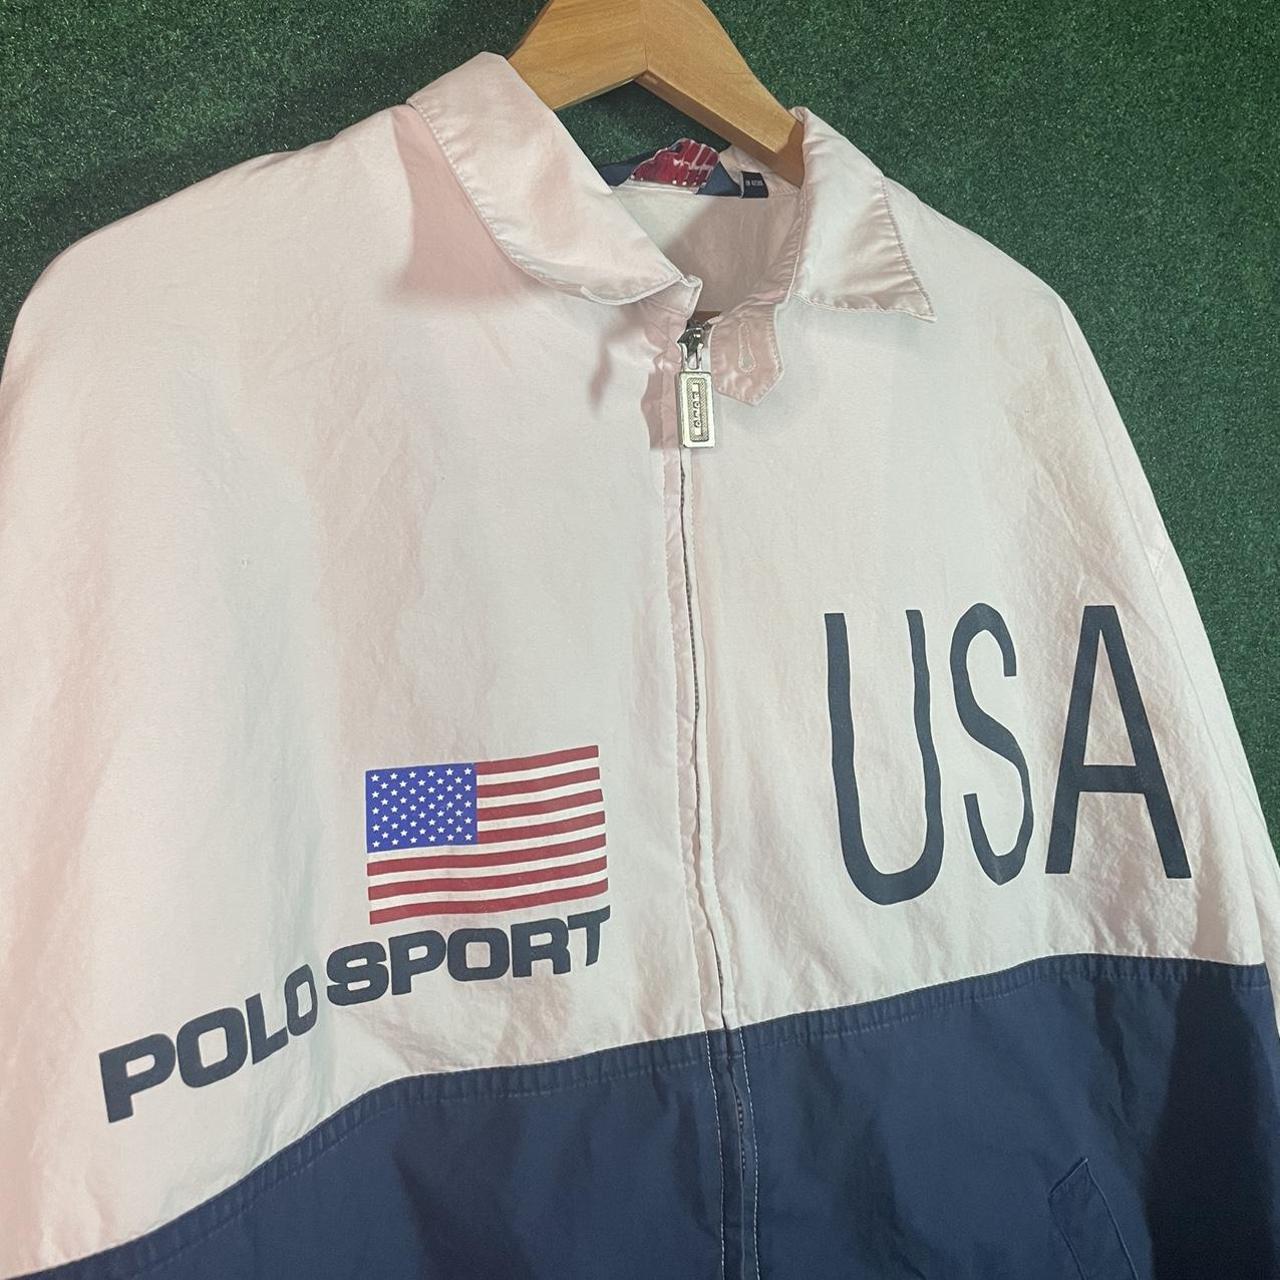 Polo Sport Men's White and Navy Jacket | Depop